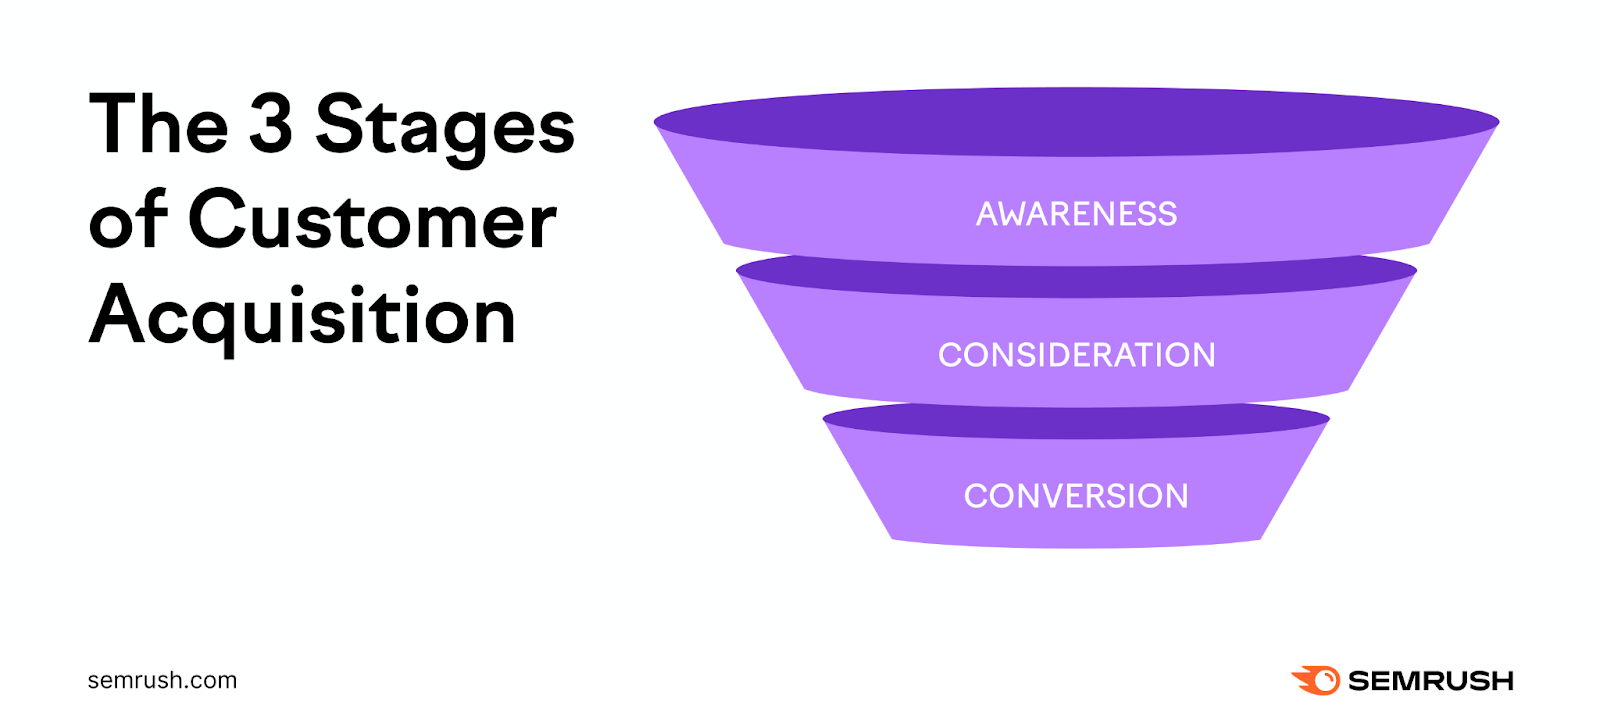 The 3 stages of customer acquisition are awareness, consideration, and conversion.